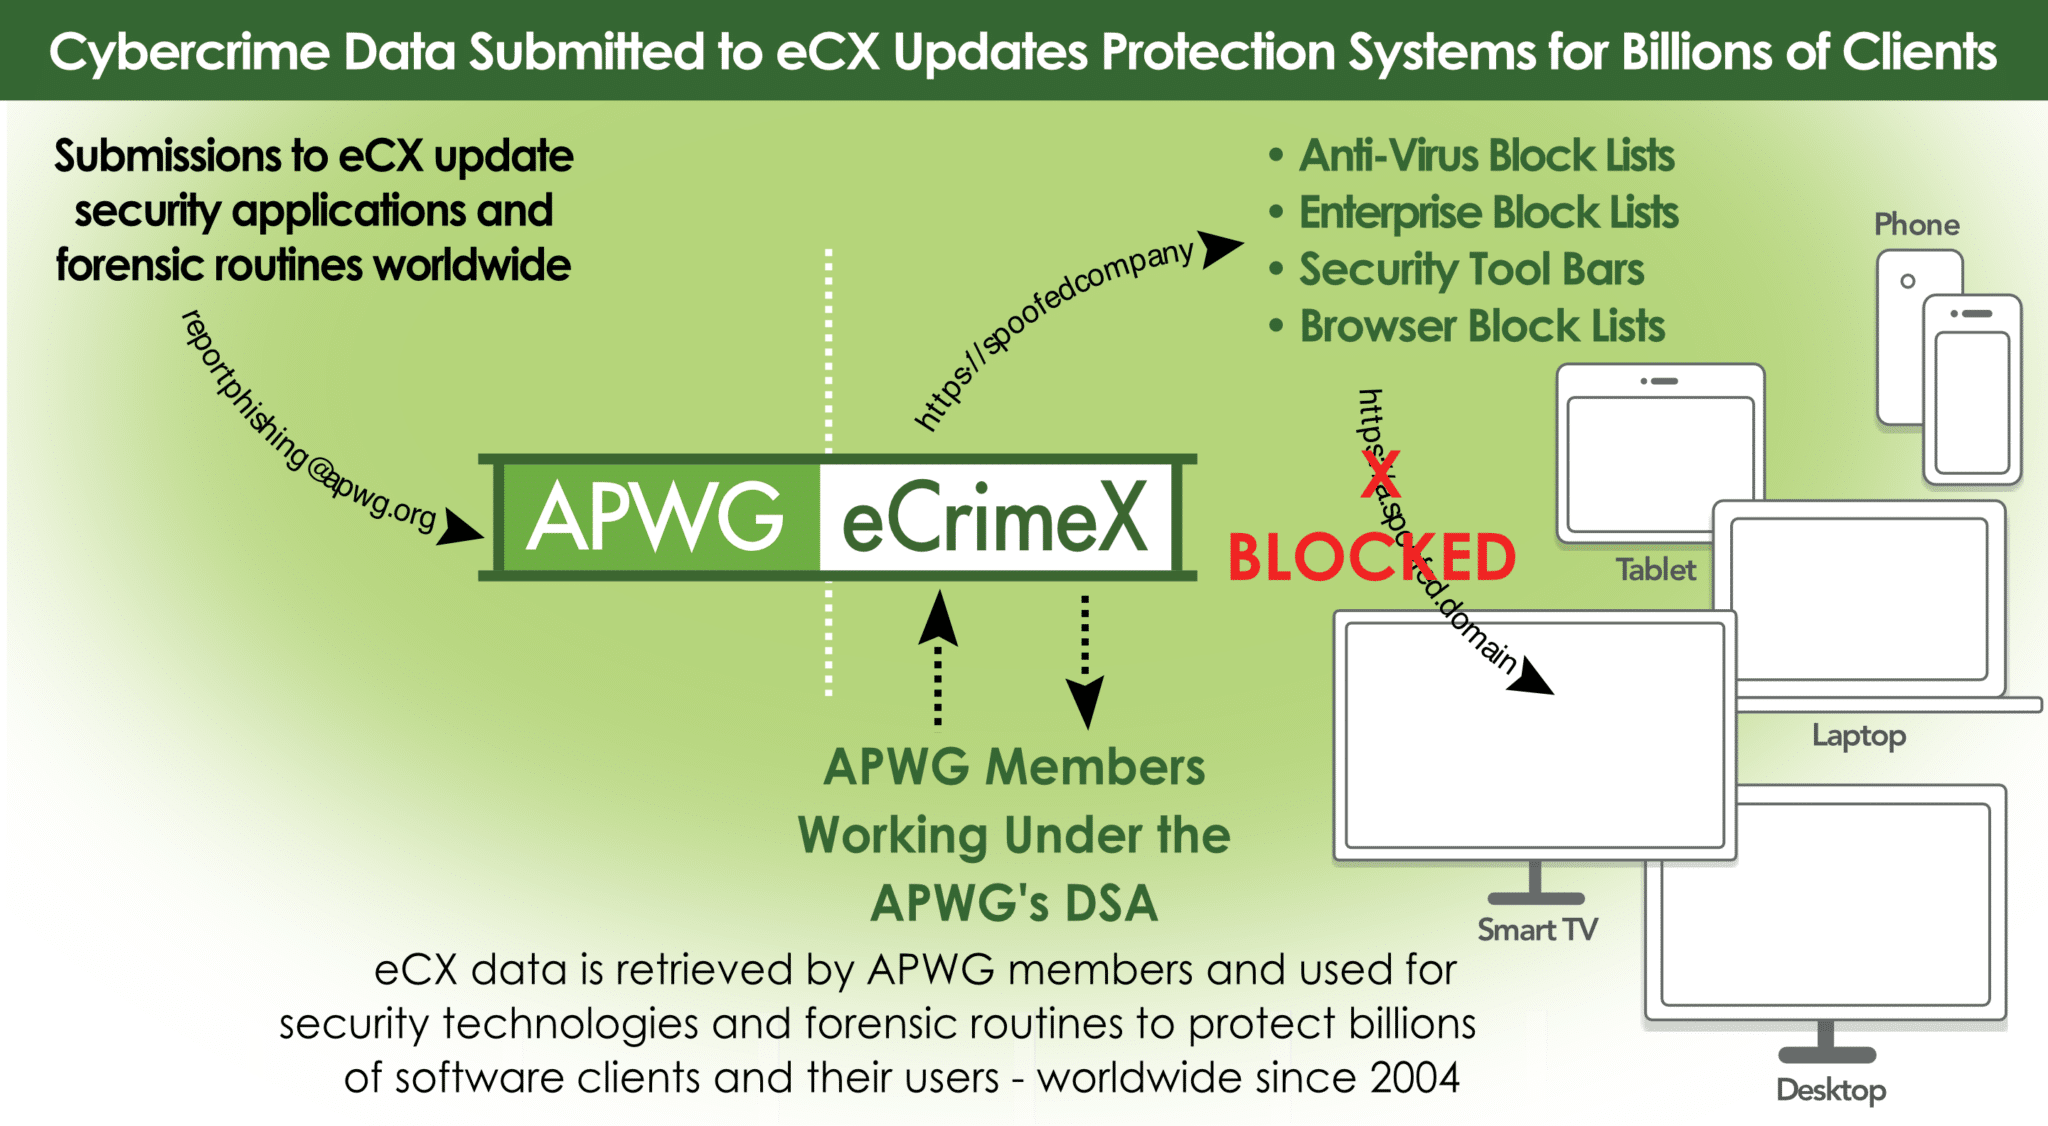 The APWG eCrime eXchange is entering its third decade as the global apex clearinghouse for cybercrime report event data